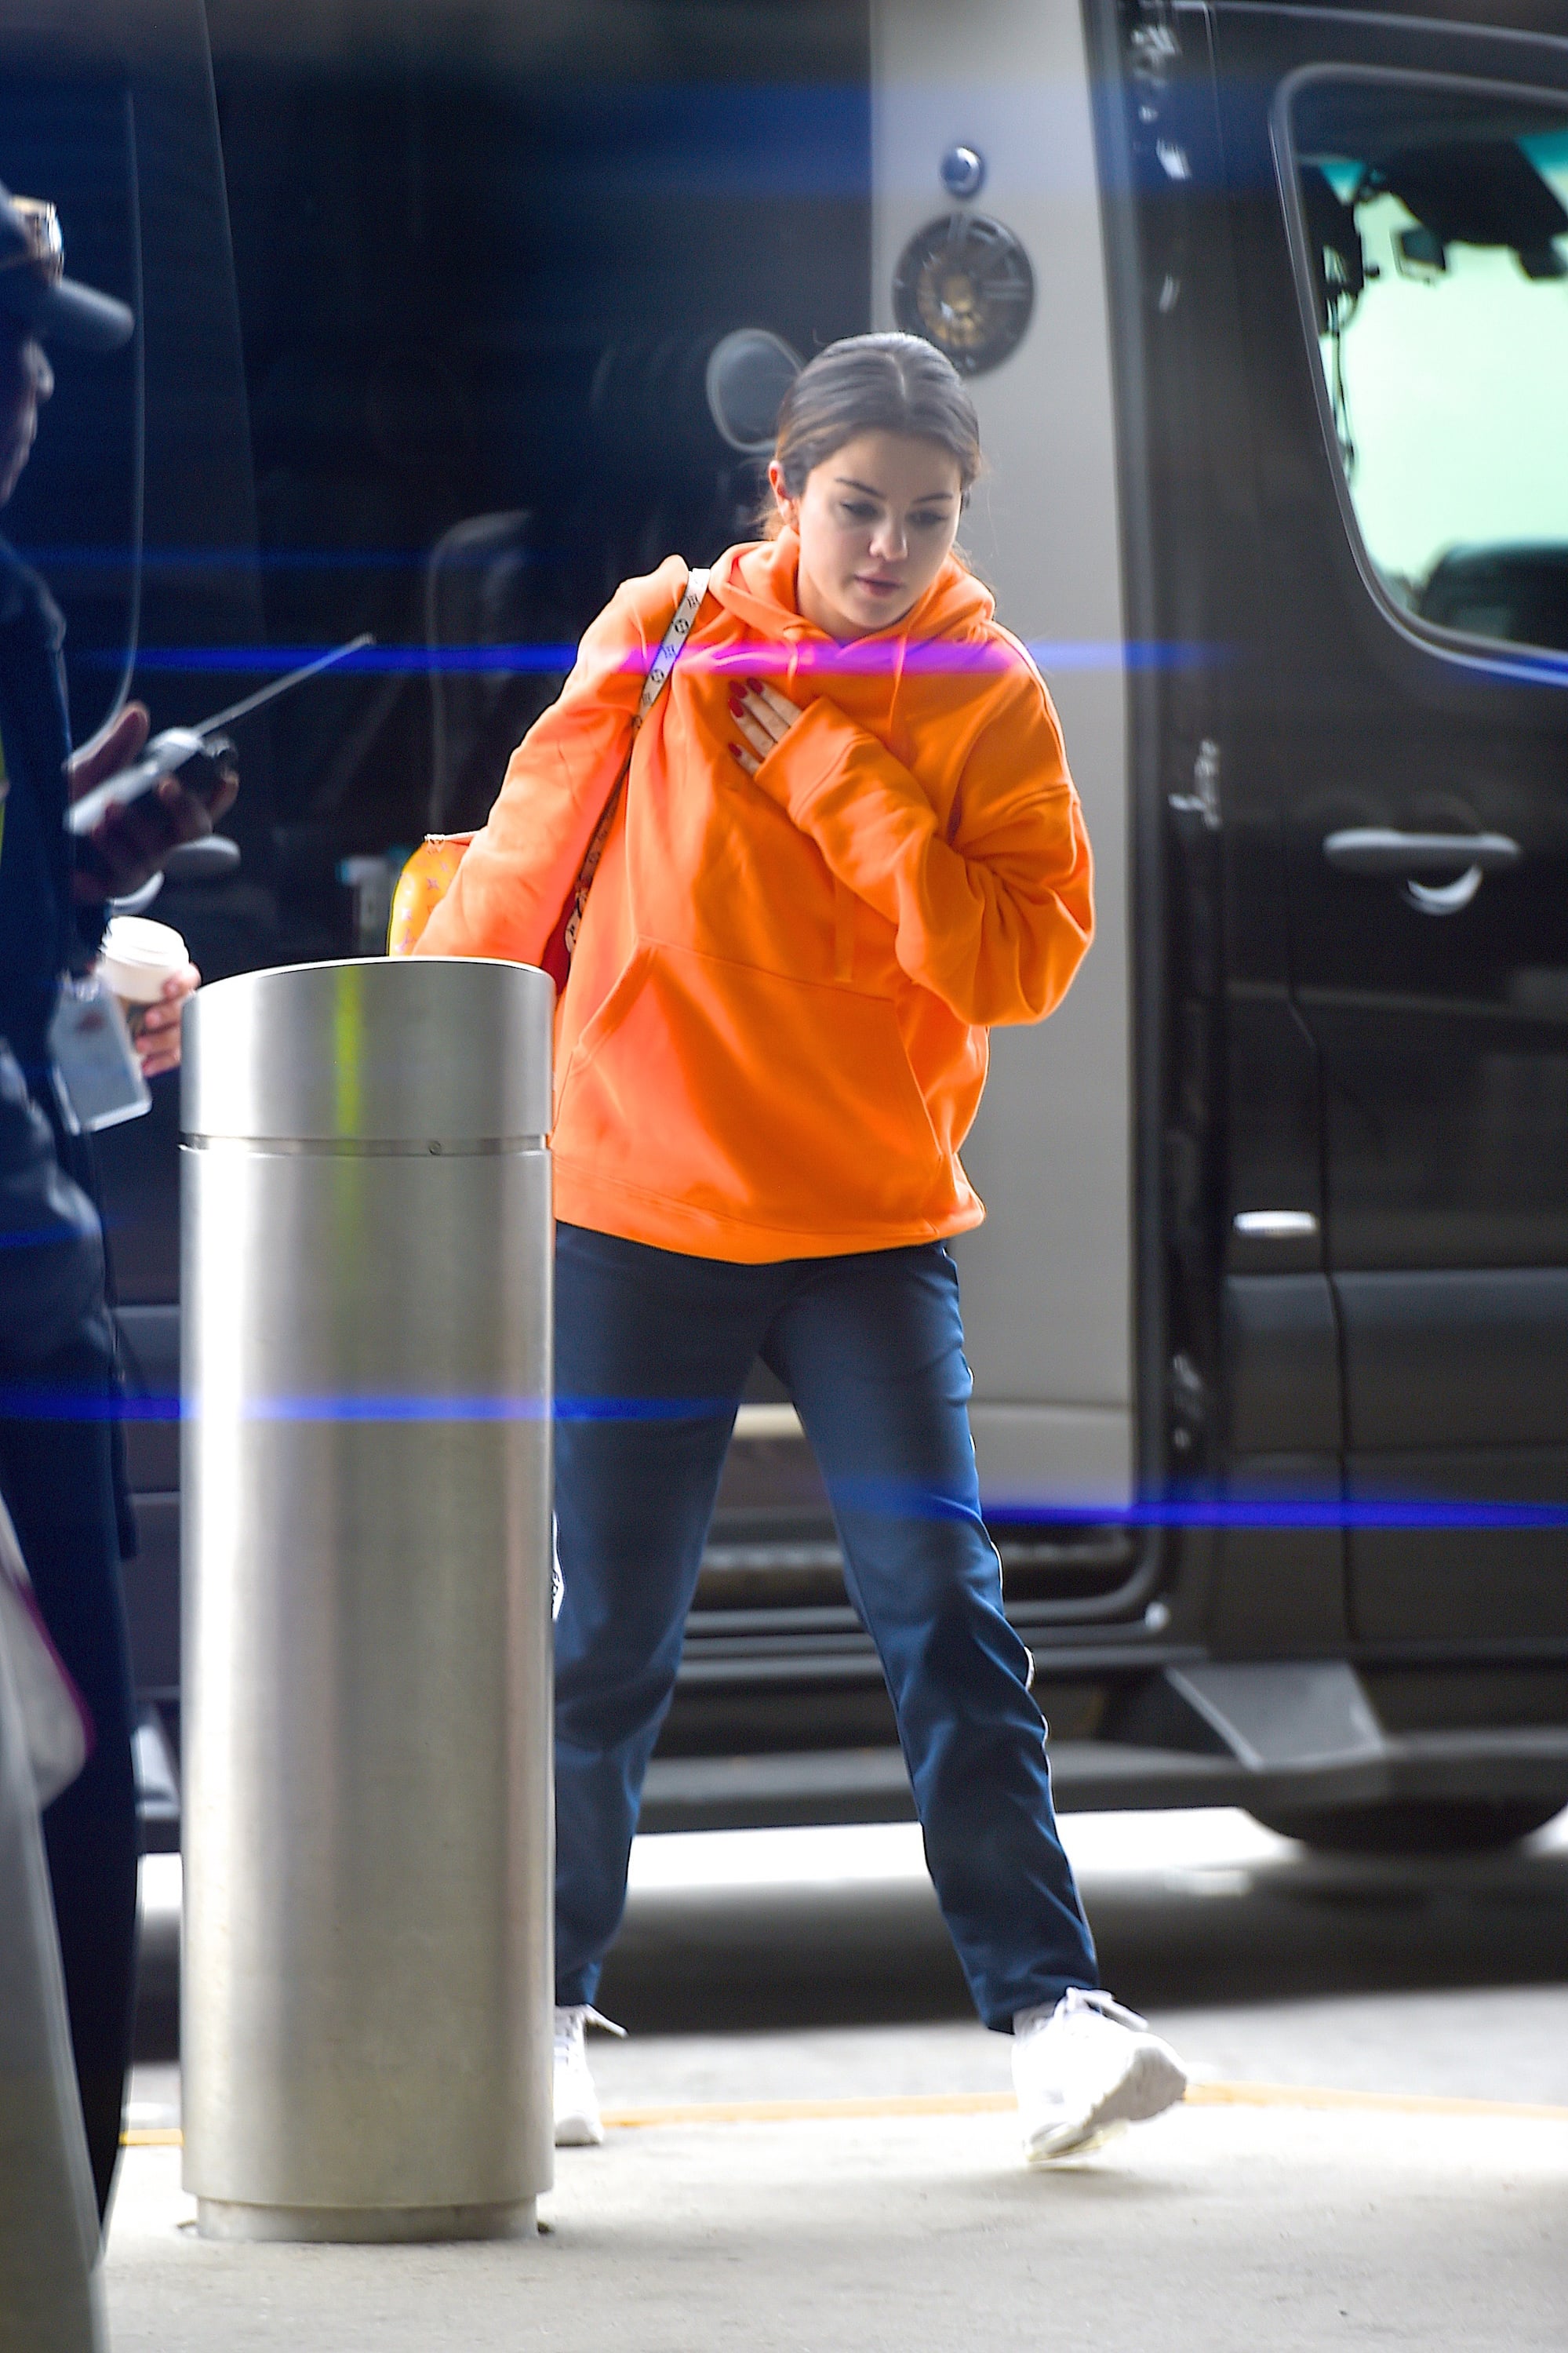 Selena Gomez's Louis Vuitton Bag and Sneakers at the Airport